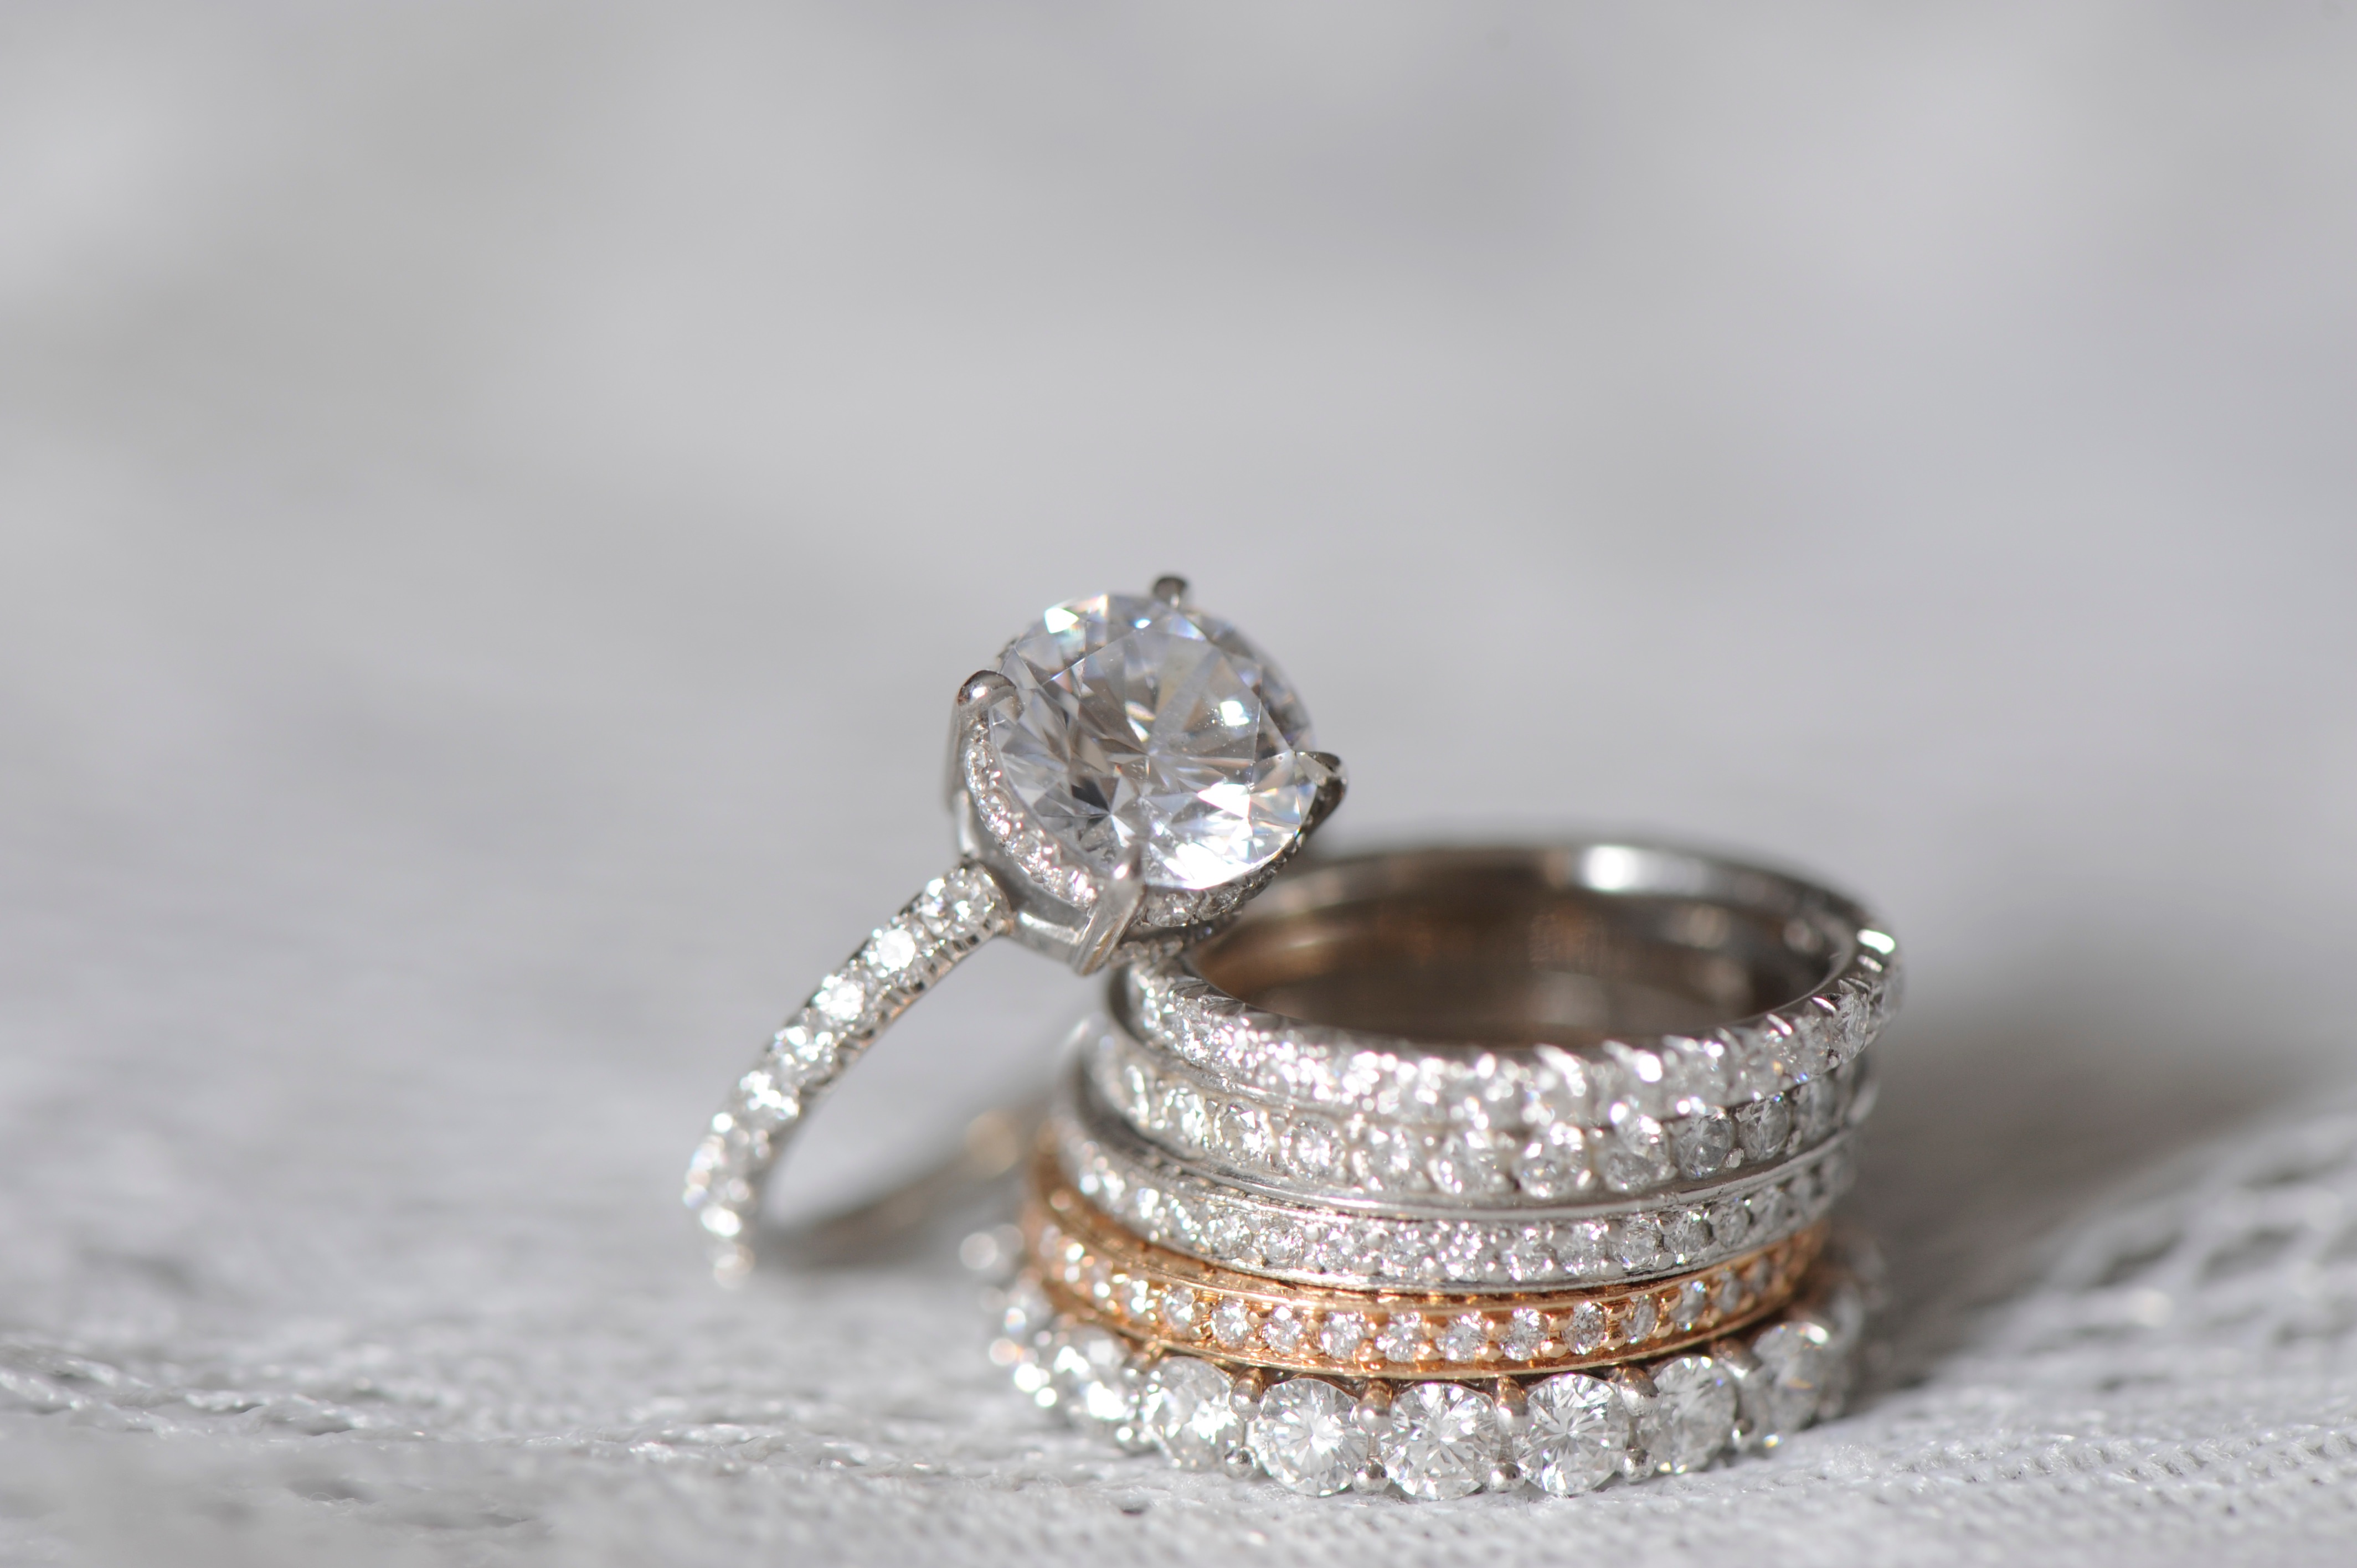 Engagement Ring Styles She Will Love Forever!